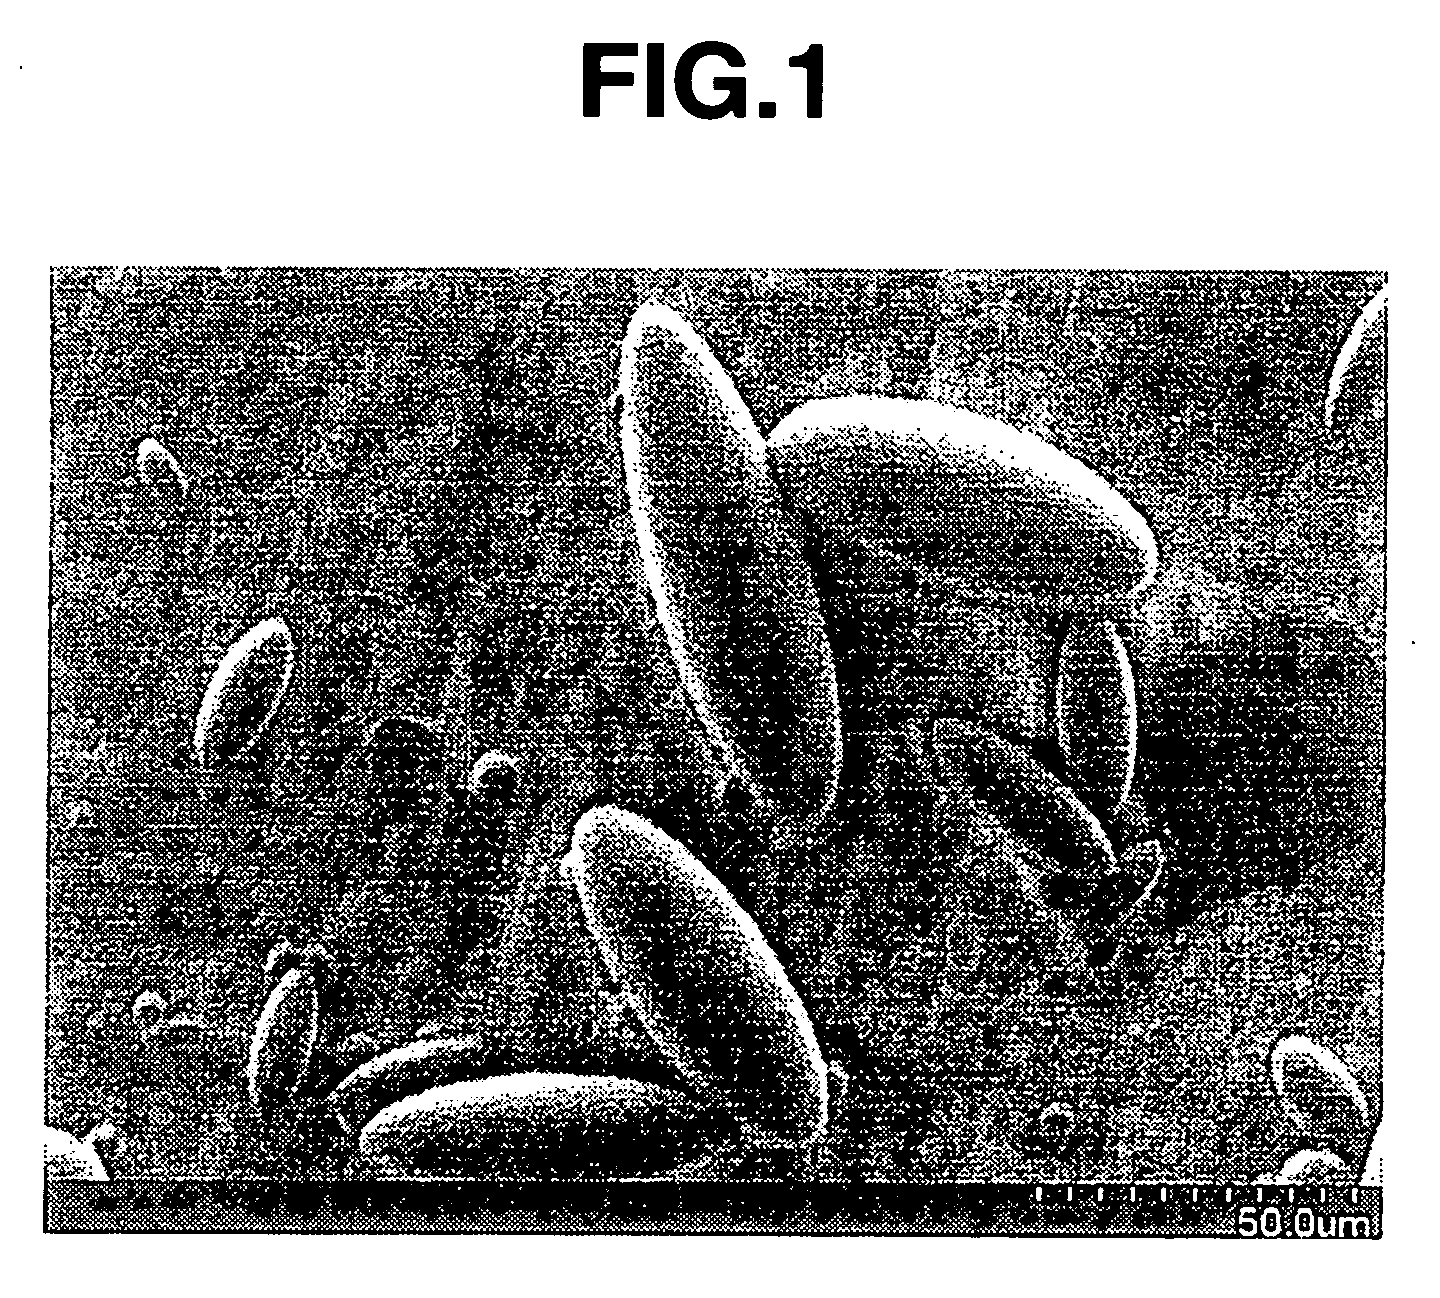 Oval-spherical organic polymer particle and process for producing the same